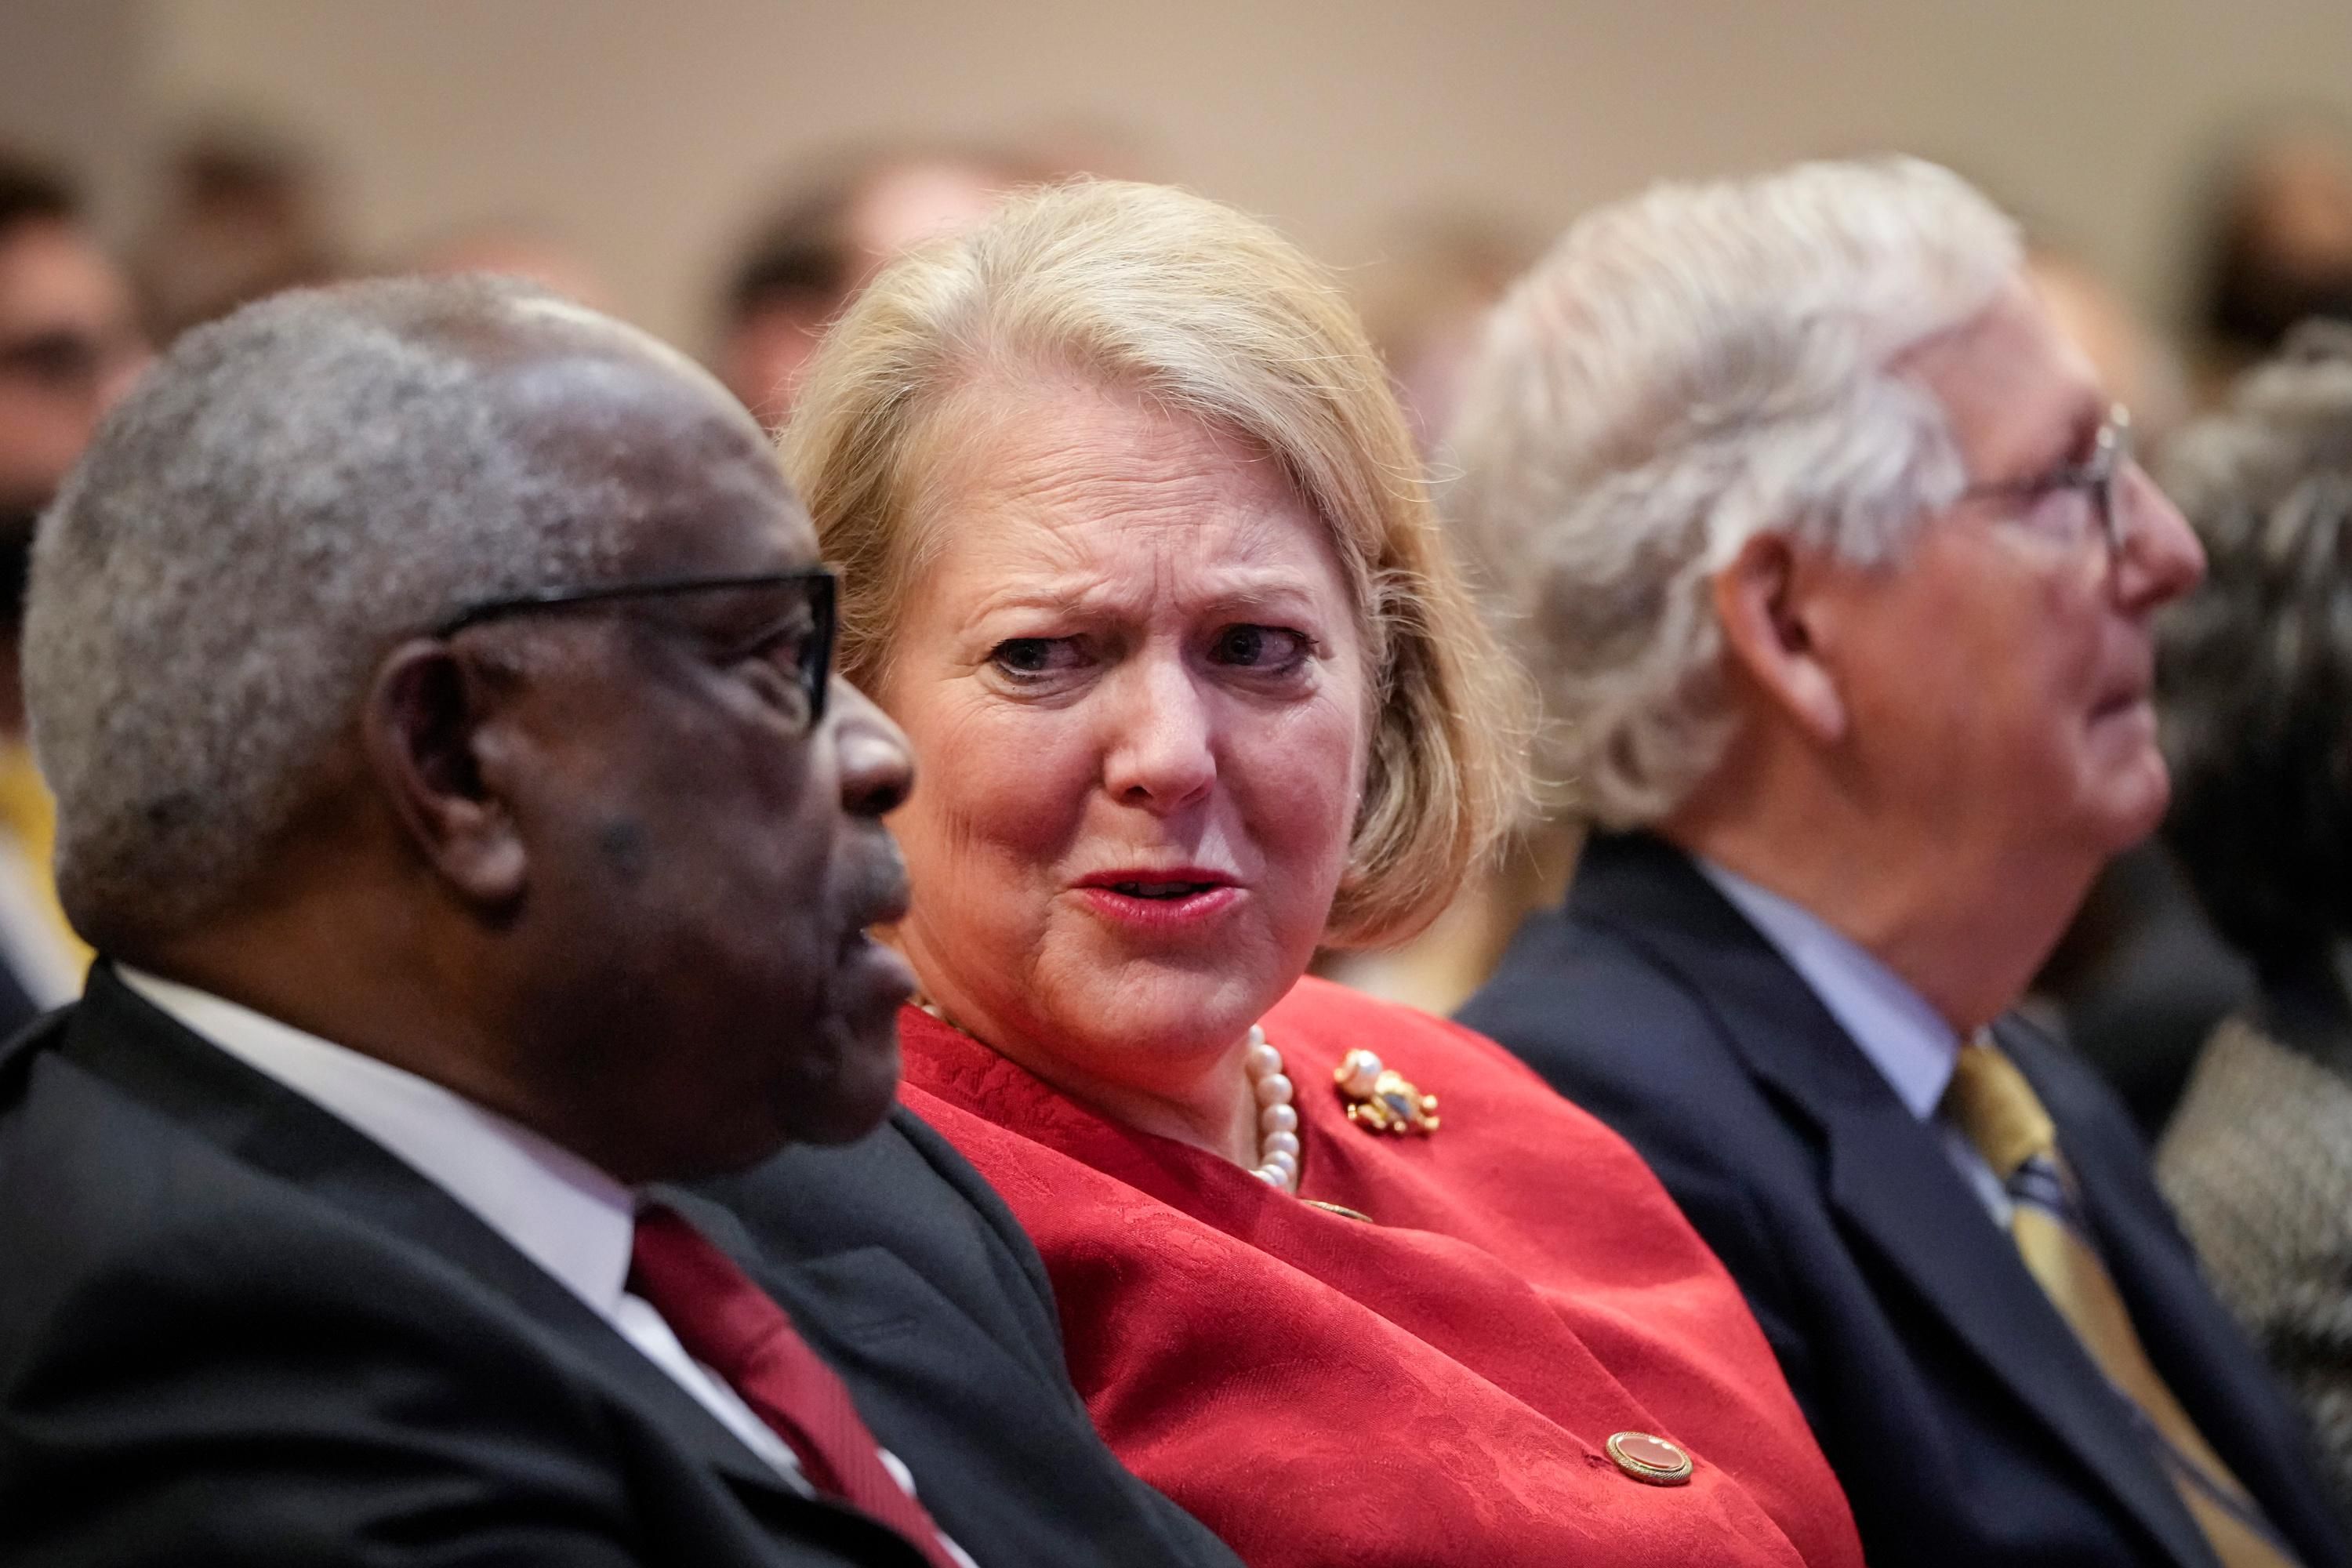 Supreme Court Justice Clarence Thomas sits with his wife Virginia Thomas